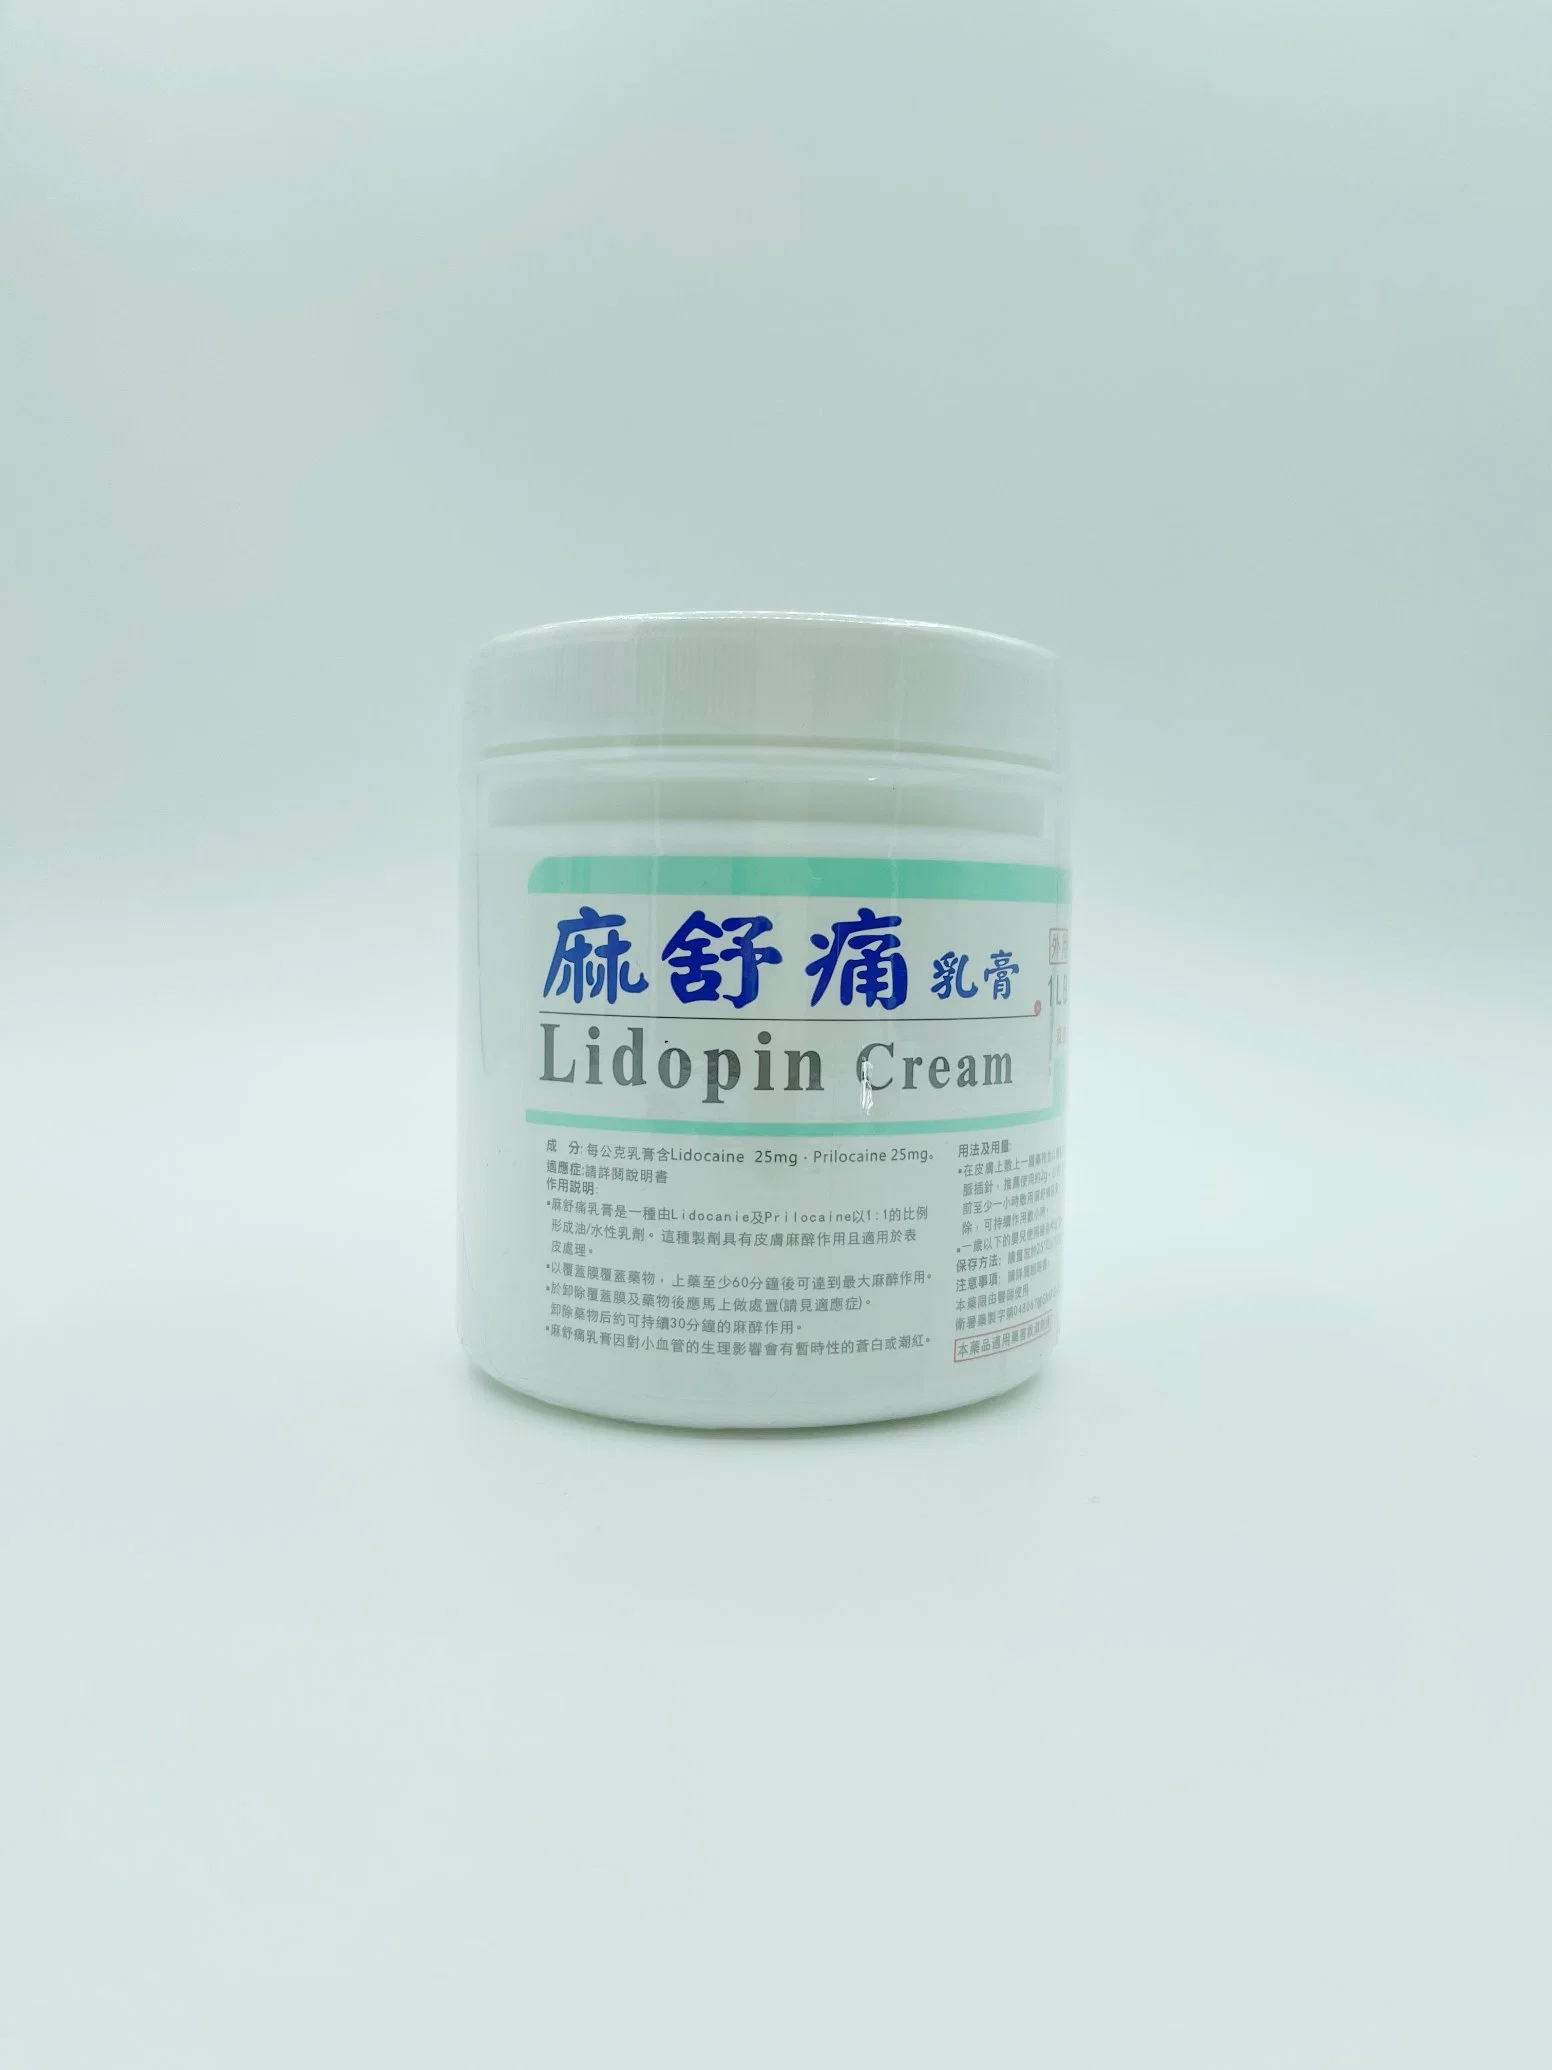 New Product Local Anesthesia Tattoo Numbing Tktx J-Cain Cream 29.9% 90% 500g Cream for Laser Hair Removal Skin Numbing Cream Safe and Fast Onset